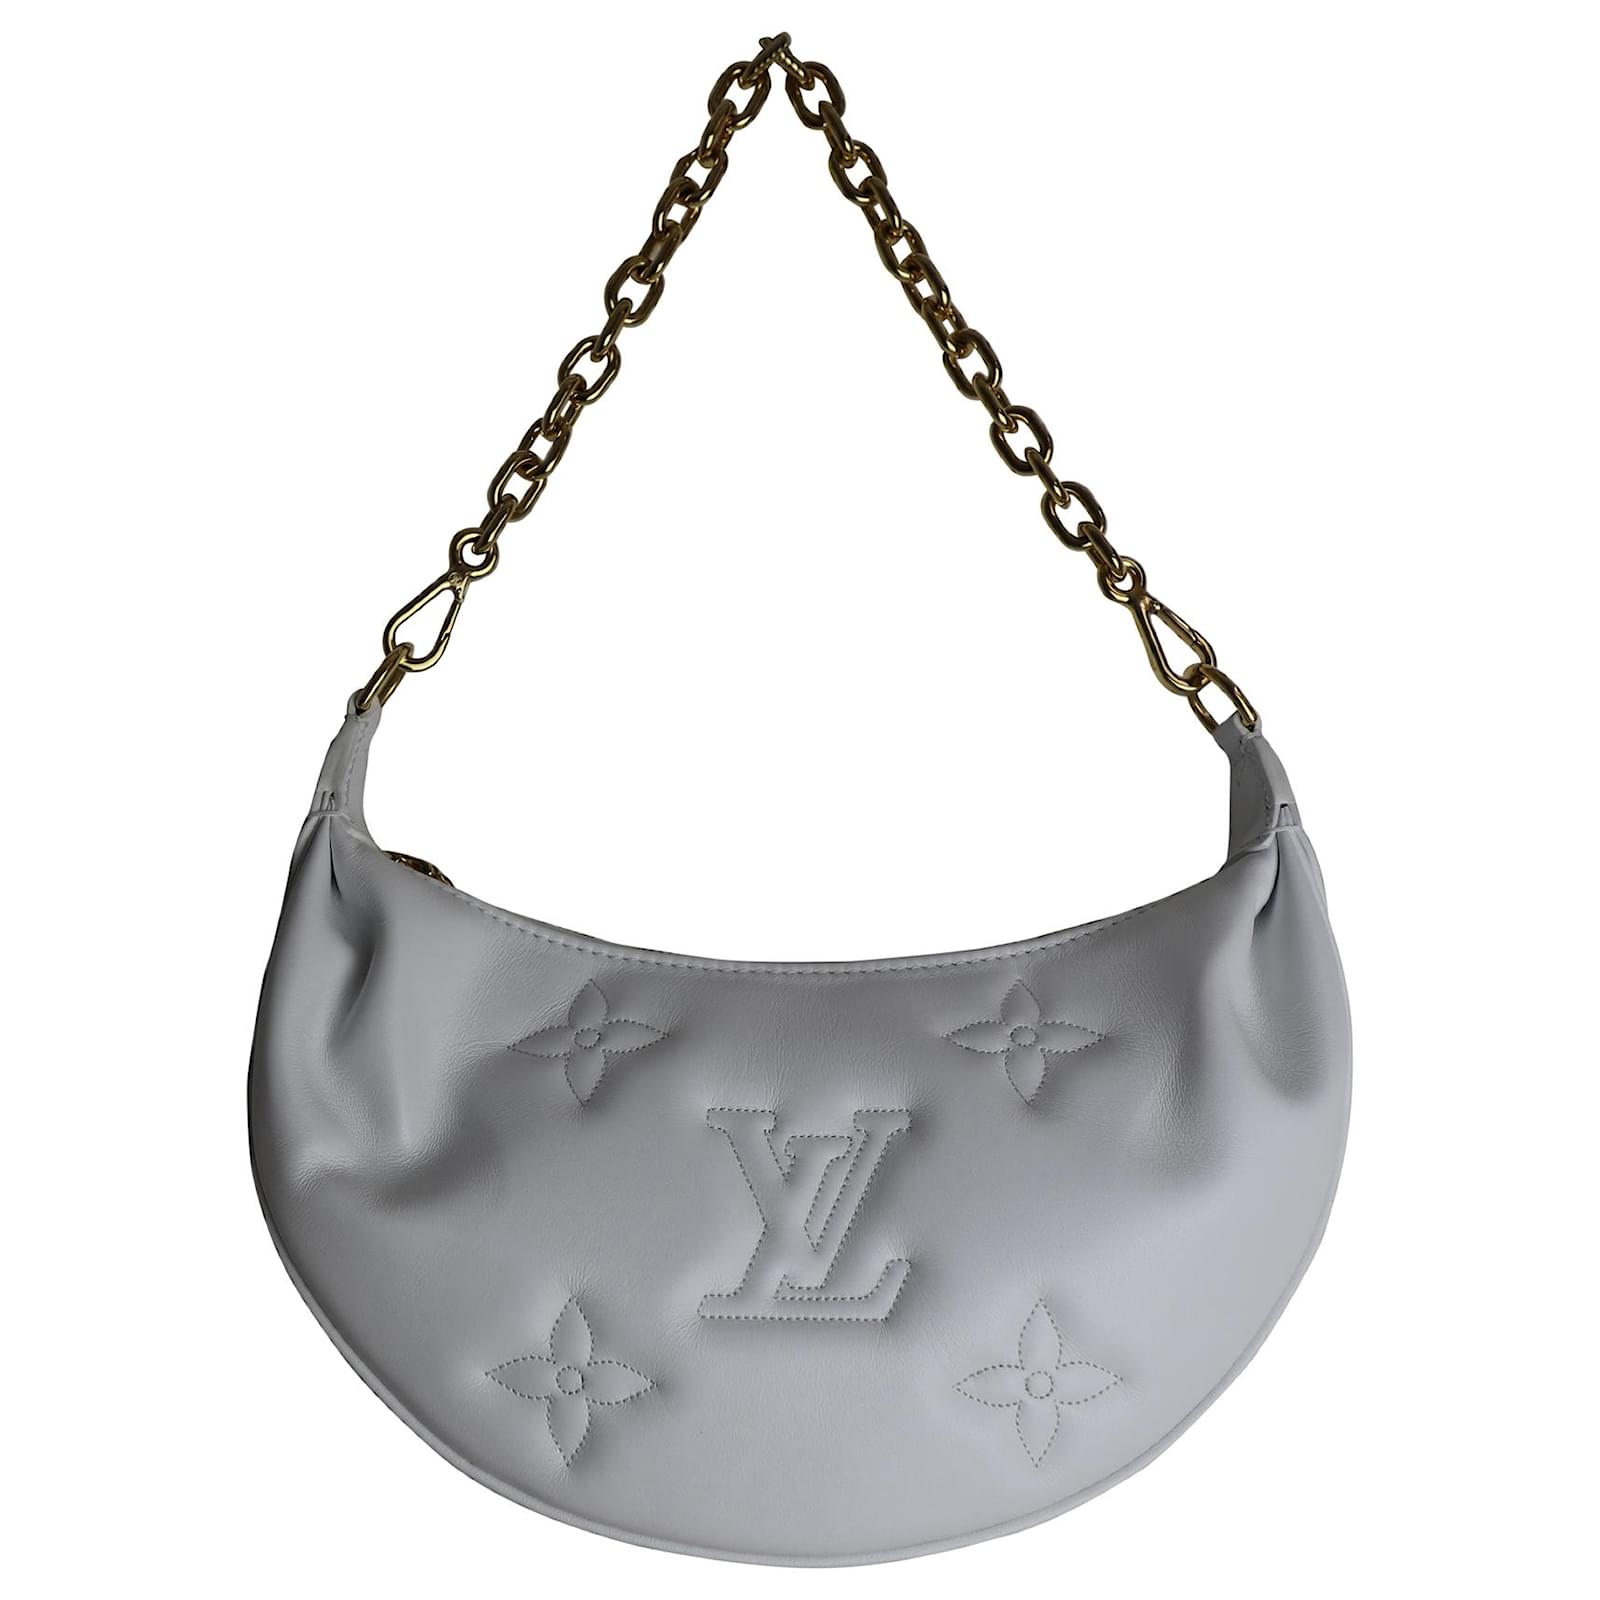 Louis Vuitton Over The Moon in White Calf Leather Pony-style